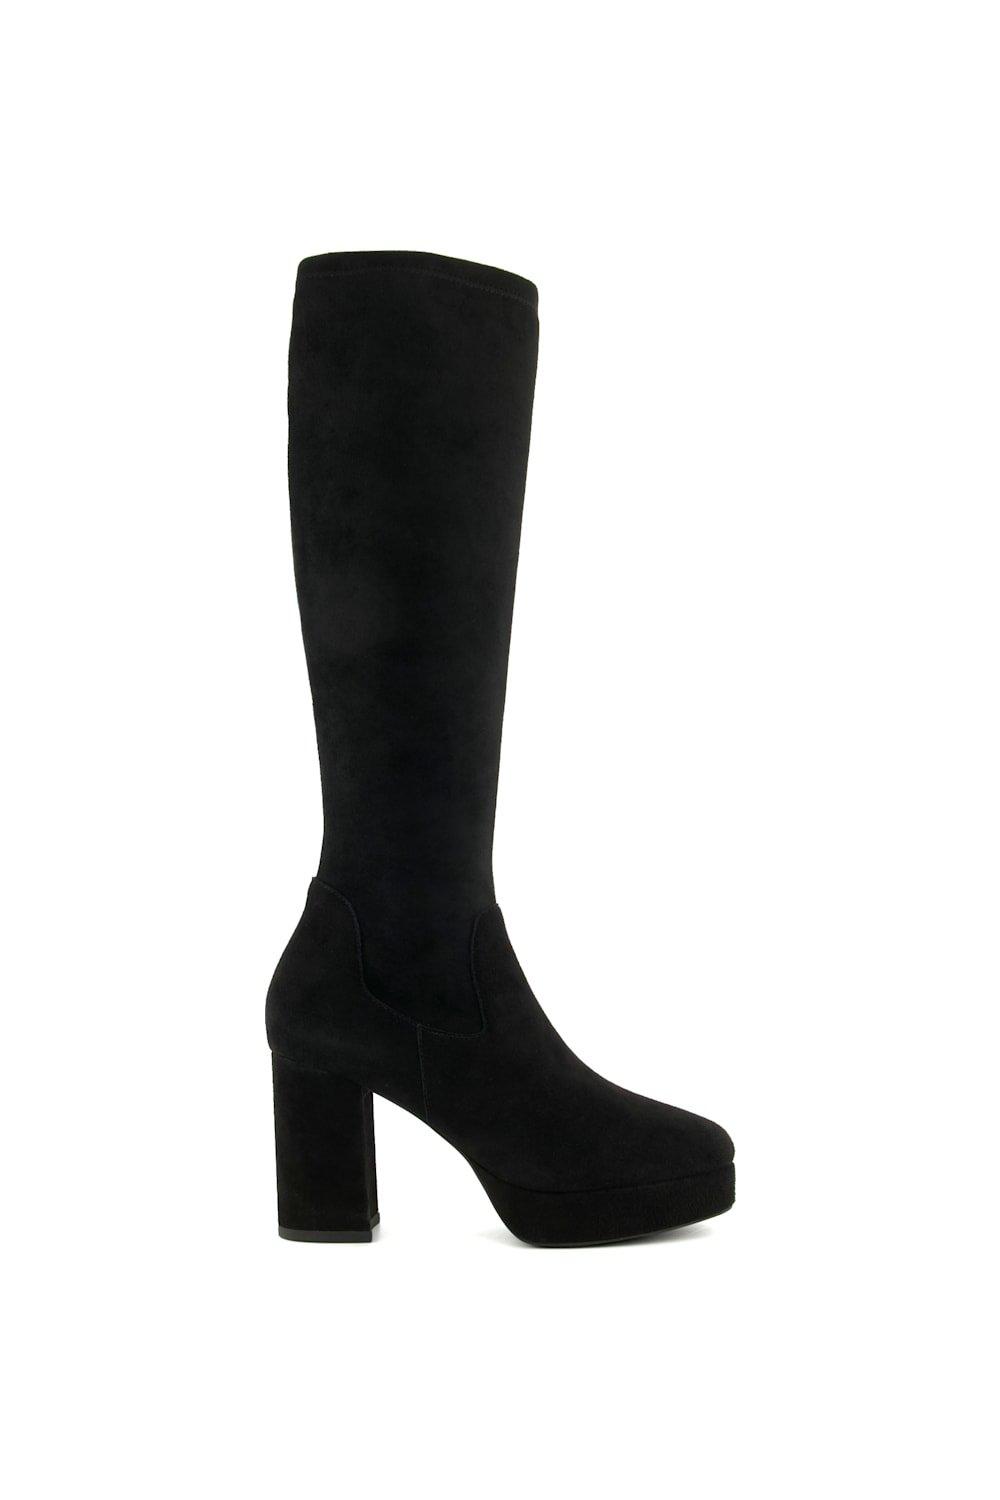 Boots | 'Sassy' Knee High Boots | Dune London